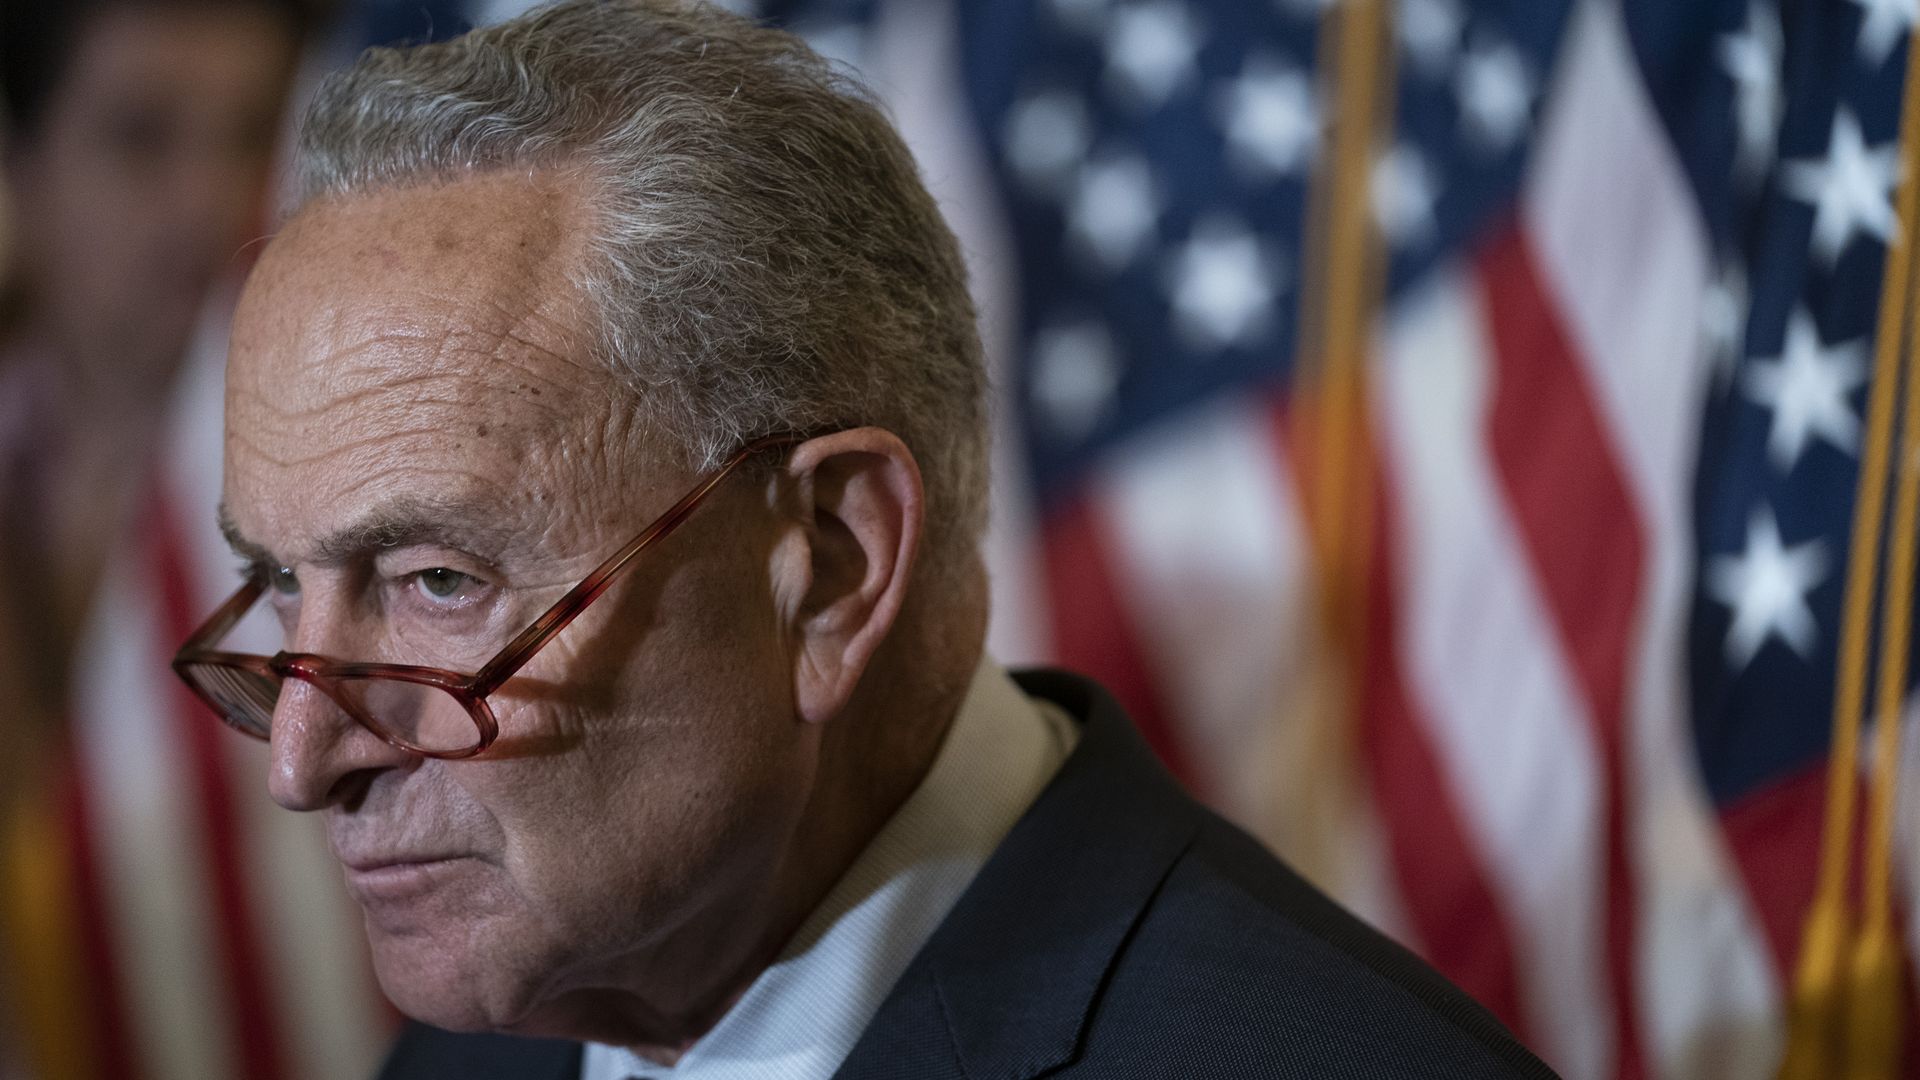 Senate Majority Leader Chuck Schumer, a Democrat from New York, listens during a news conference.